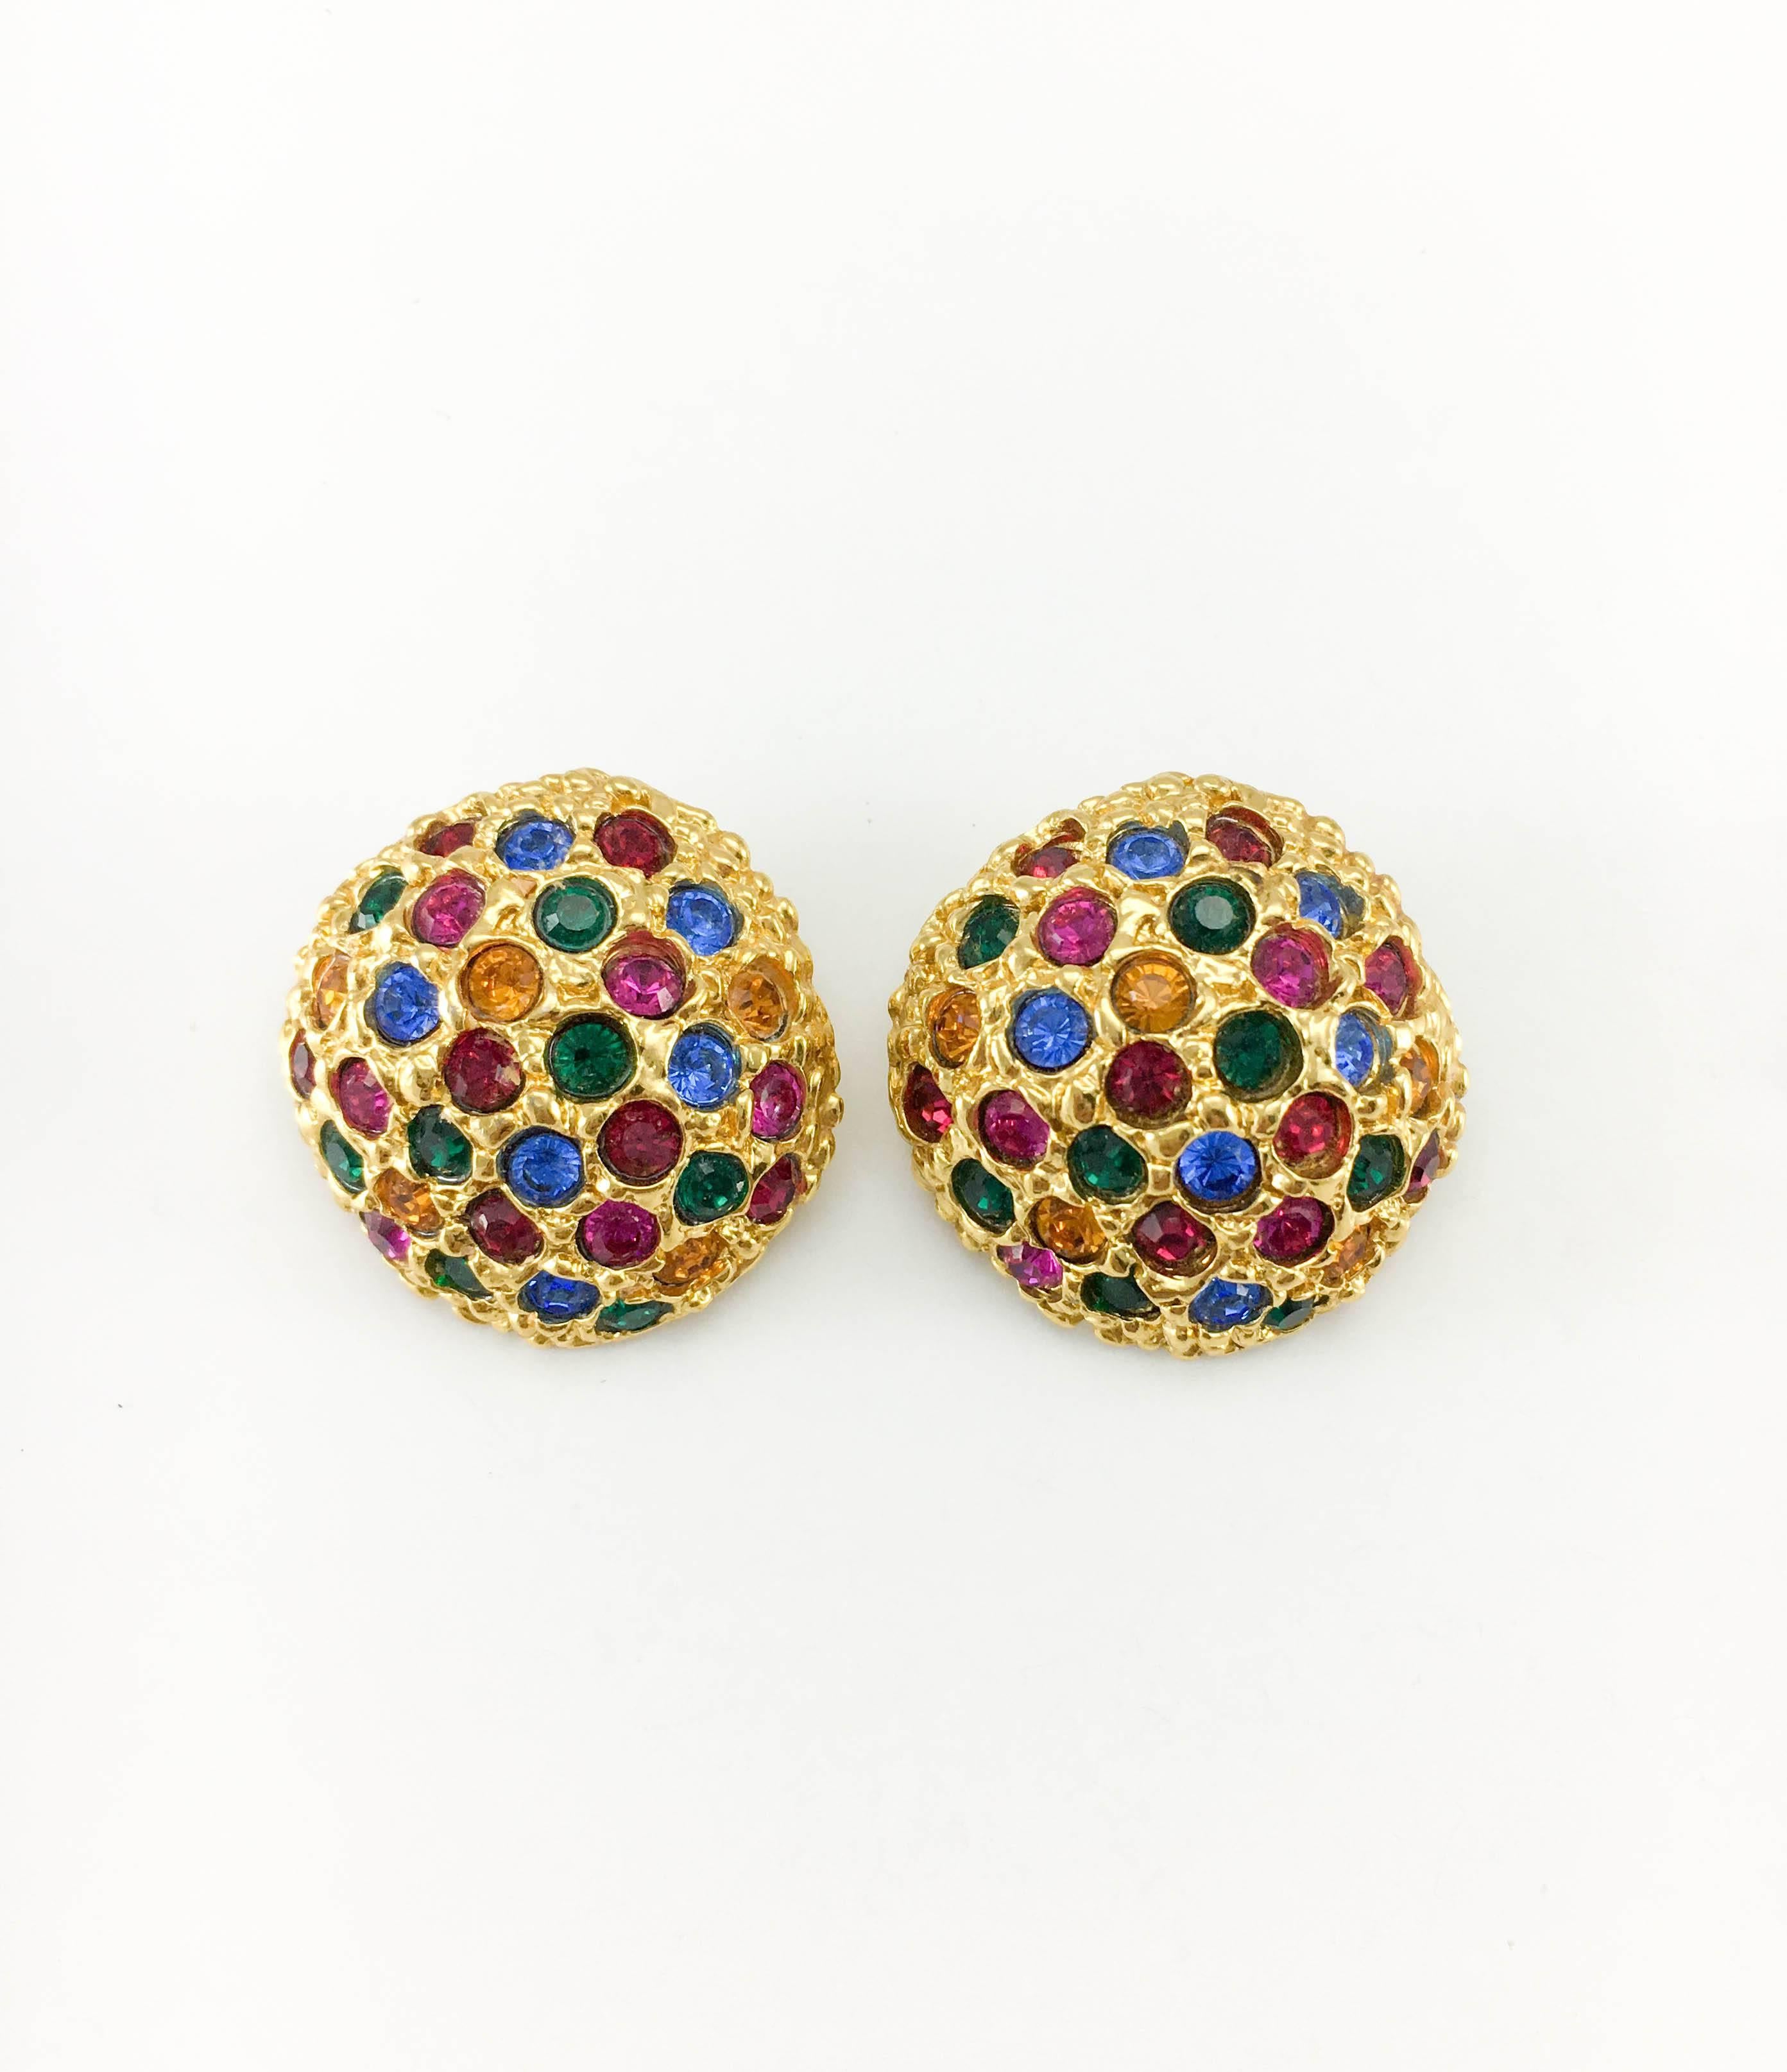 Vintage Yves Saint Laurent Colourful Gold-Plated Round Clip-on Earrings. These striking earrings by Yves Saint Laurent were created by the iconic jewellery designer Robert Goossens in the 1980’s. The design is organic and resembles a gold nugget